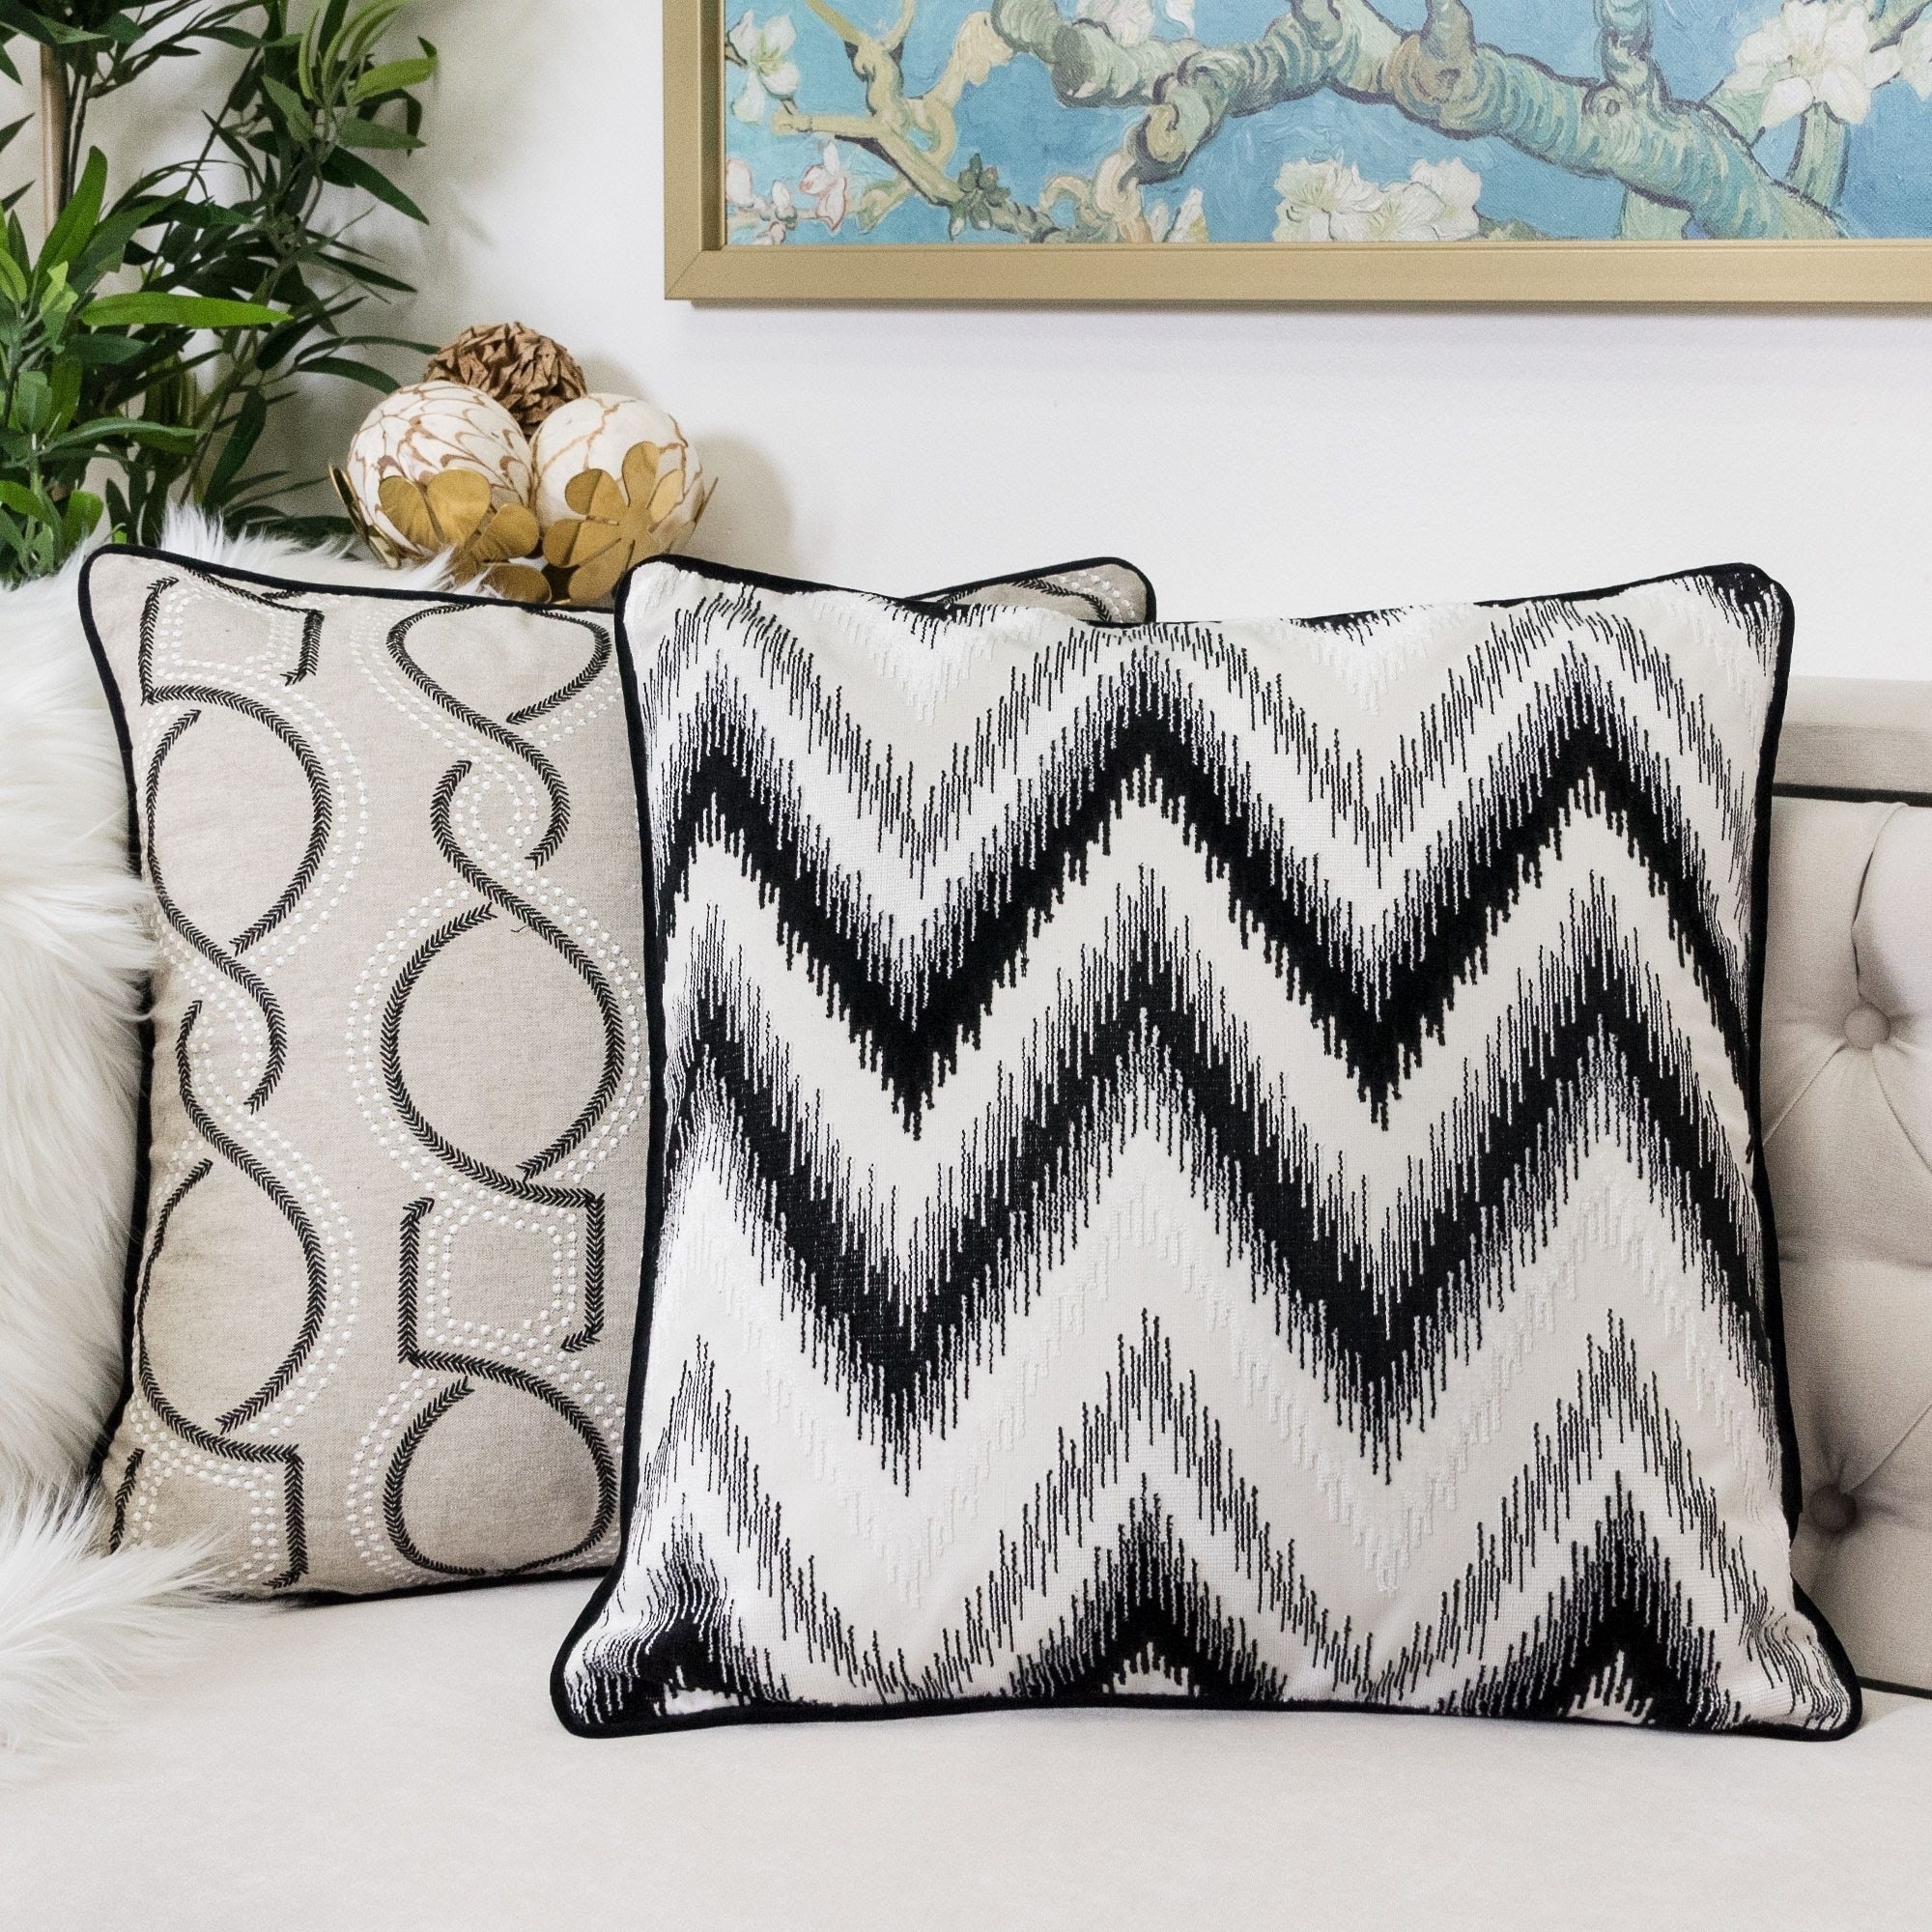 https://ak1.ostkcdn.com/images/products/30077357/Black-Series-Zig-Zag-Liner-Velvet-Large-Sofa-Couch-Pillow-01988974-b256-4054-8282-8032afbeefc6.jpg